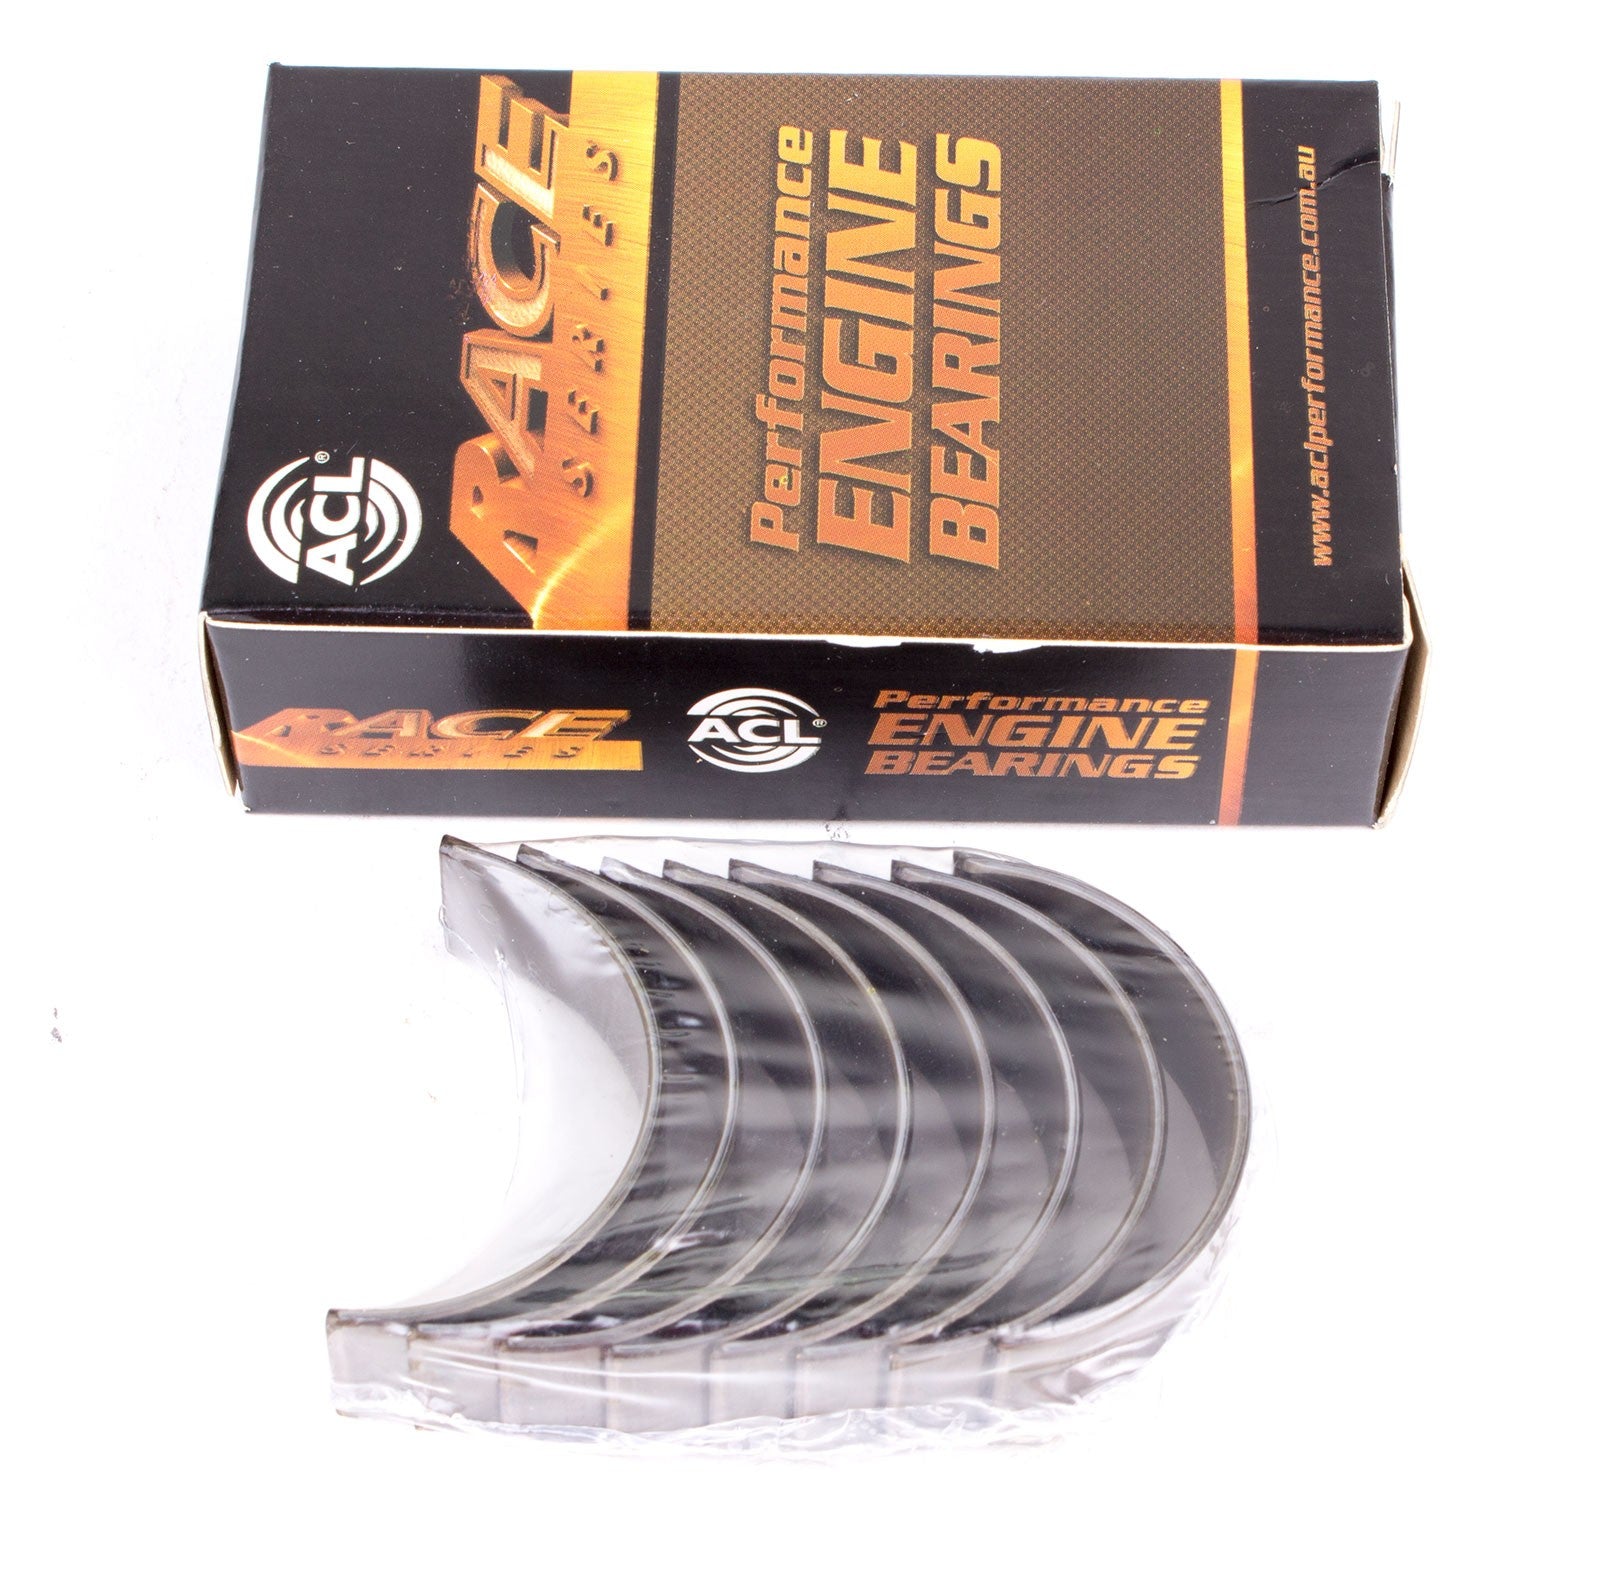 ACL 5M829H-011 Main bearing set (ACL Race Series) Photo-0 